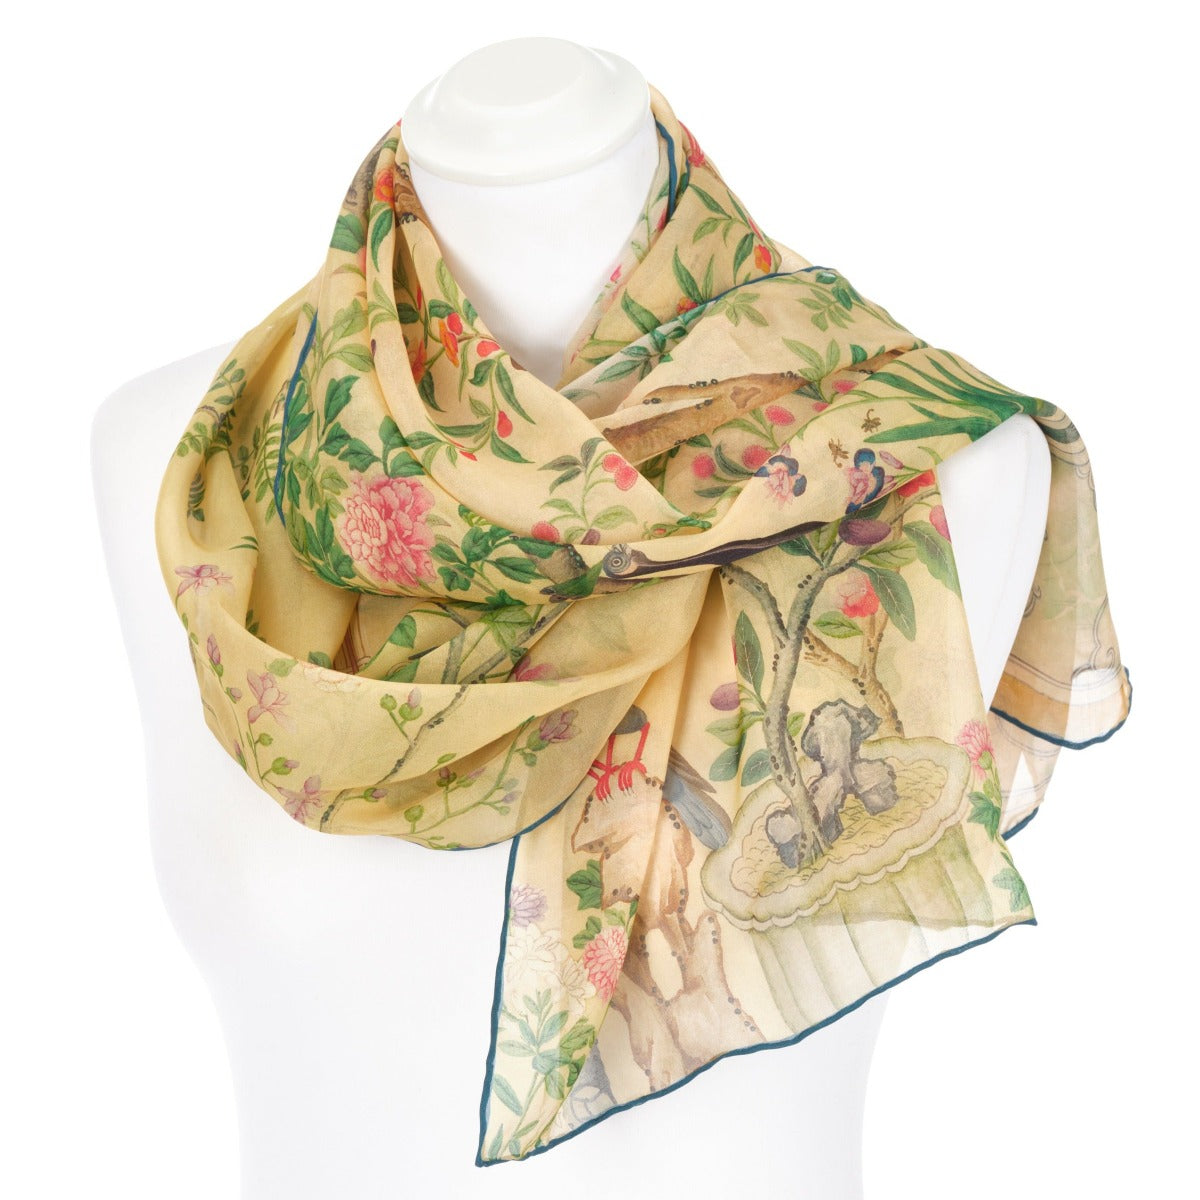 A pastel yellow chiffon scarf draped over a mannequin on a white background. The scarf design features birds, flowers and tree branches.